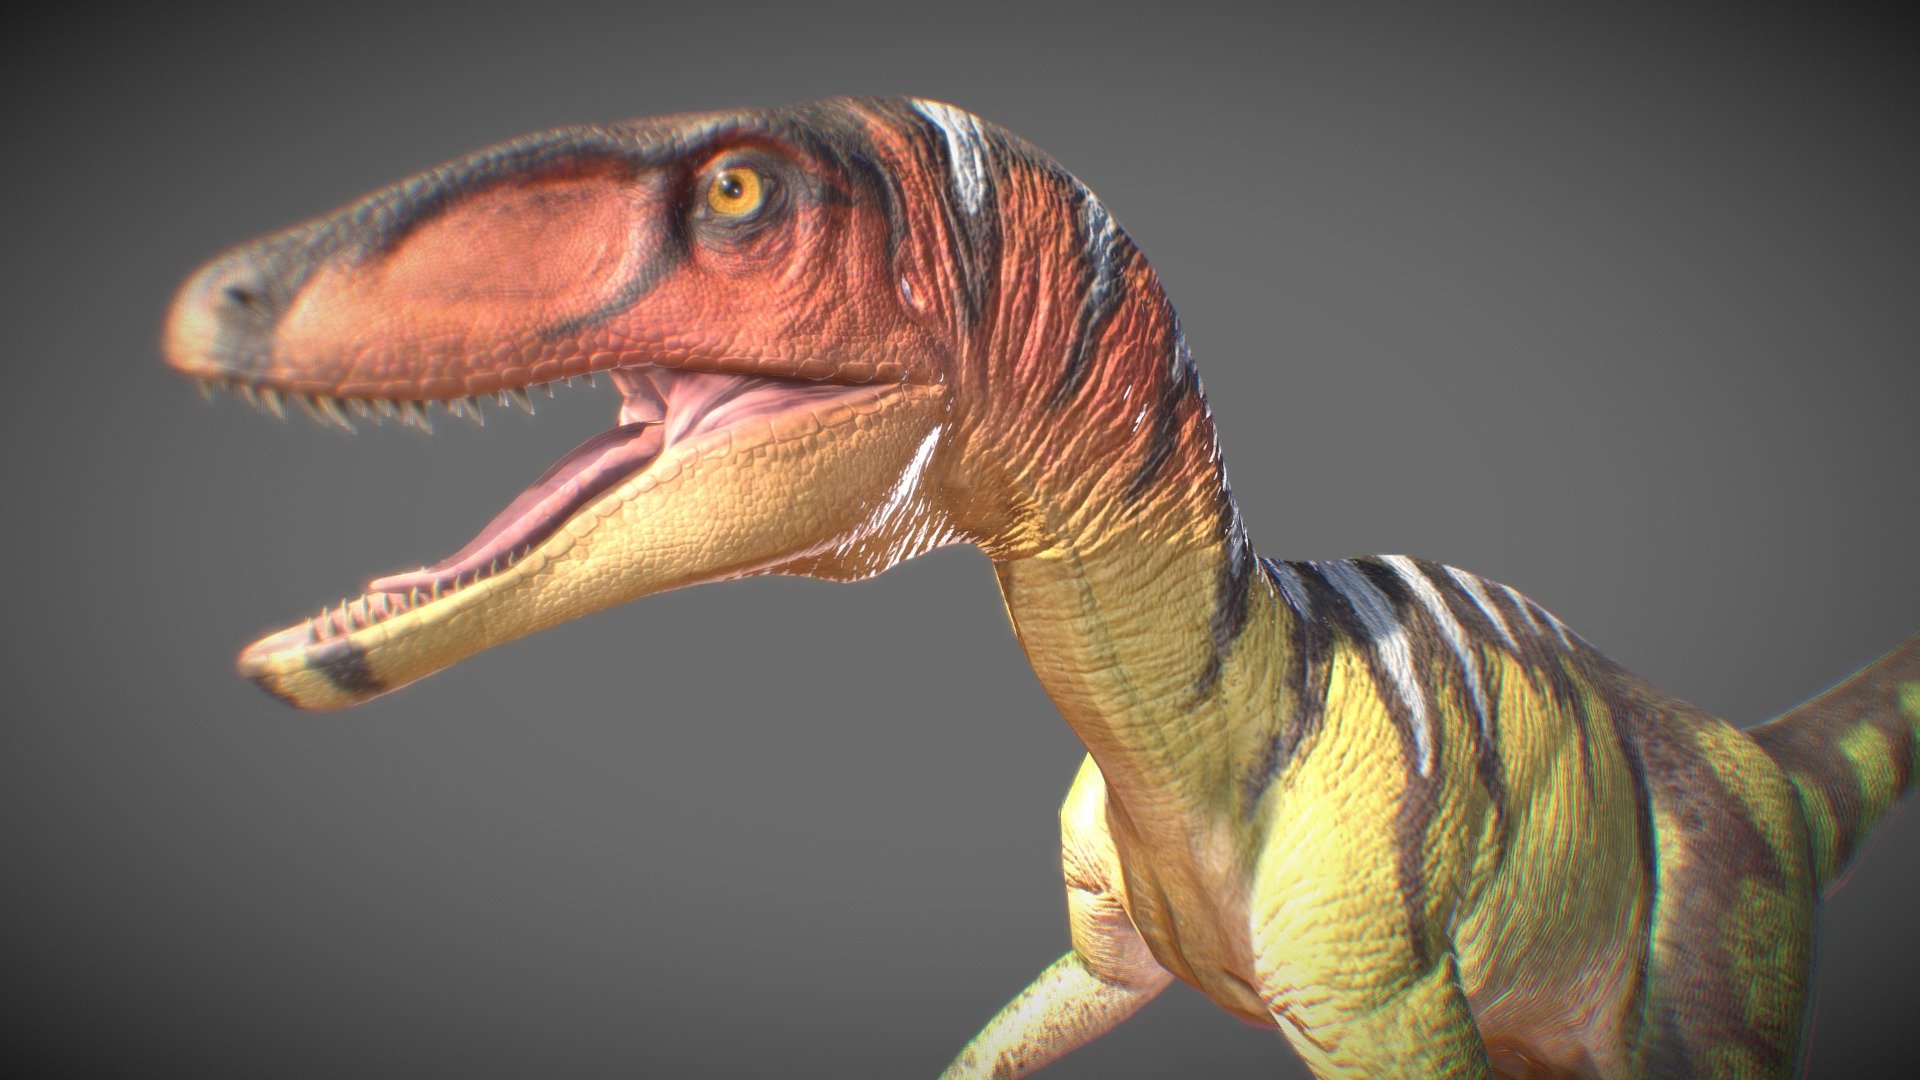 My version of deinonychus, I didn't intend to make a realistic version, rather something based on the style of the 90s like those of jurassic park that gave so much influence.

Note: By some reason the gizmo in sketchfab is displaced even though it is fine in Maya, if anyone knows how to fix it I would appreciate it 3d model